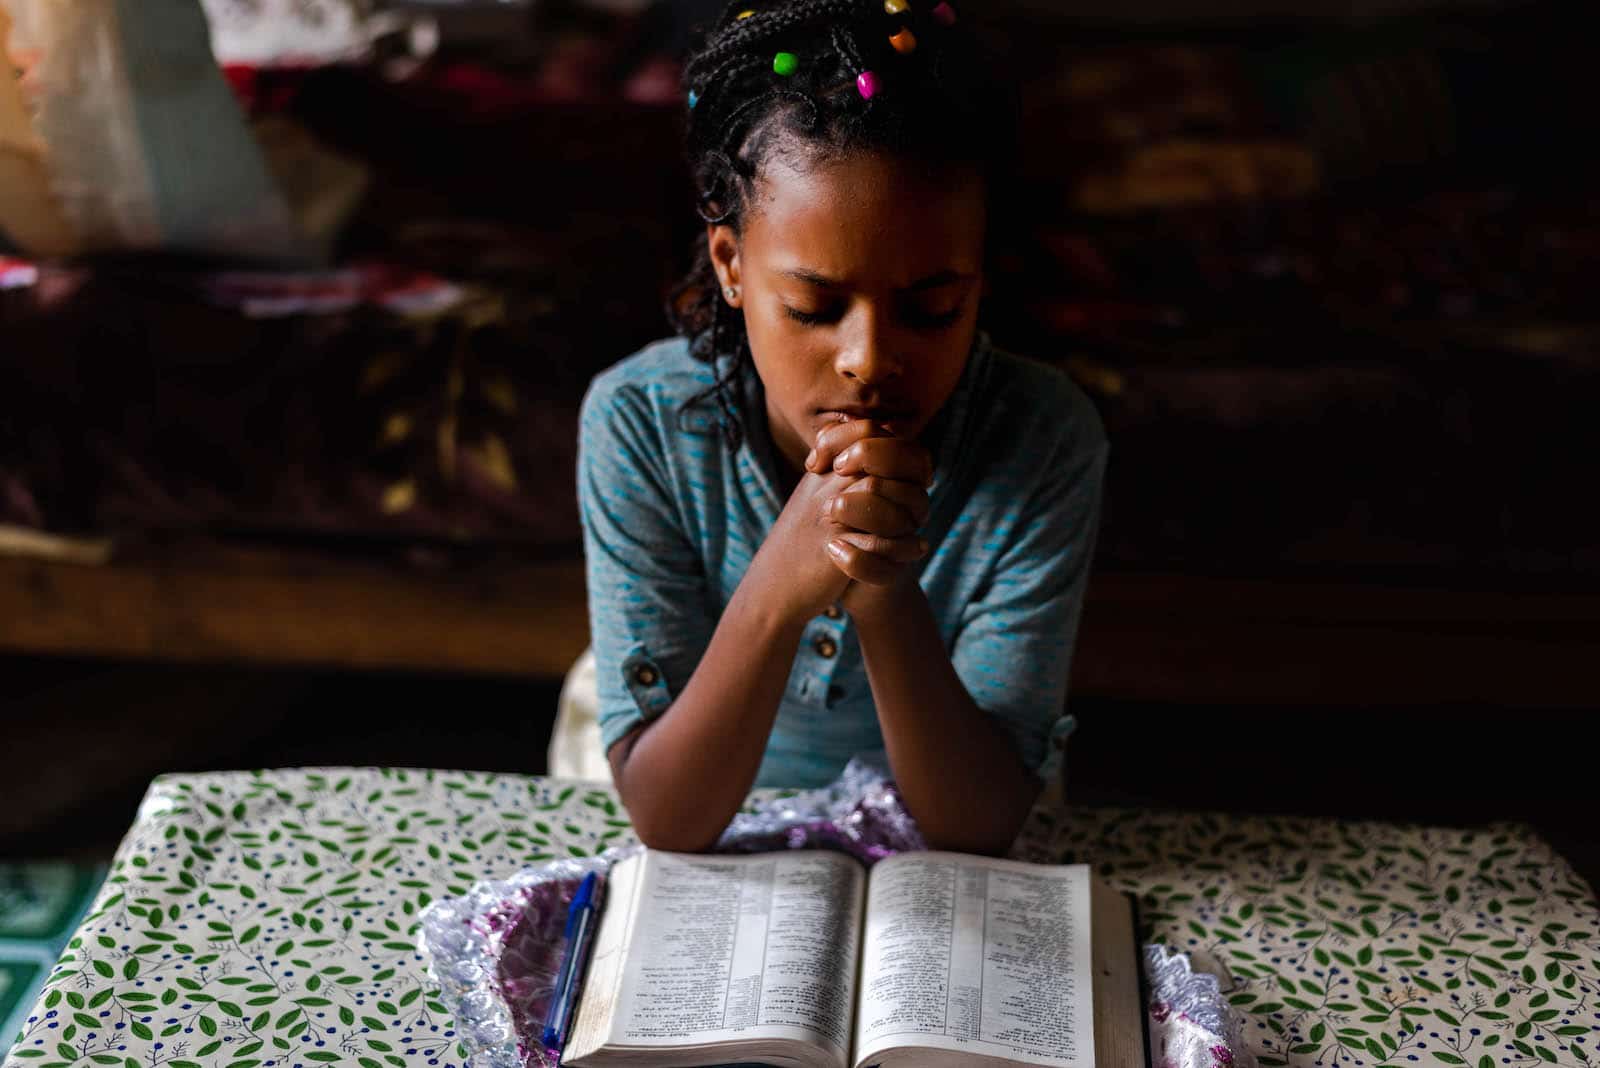 A girl leans on a bed, praying over a Bible.